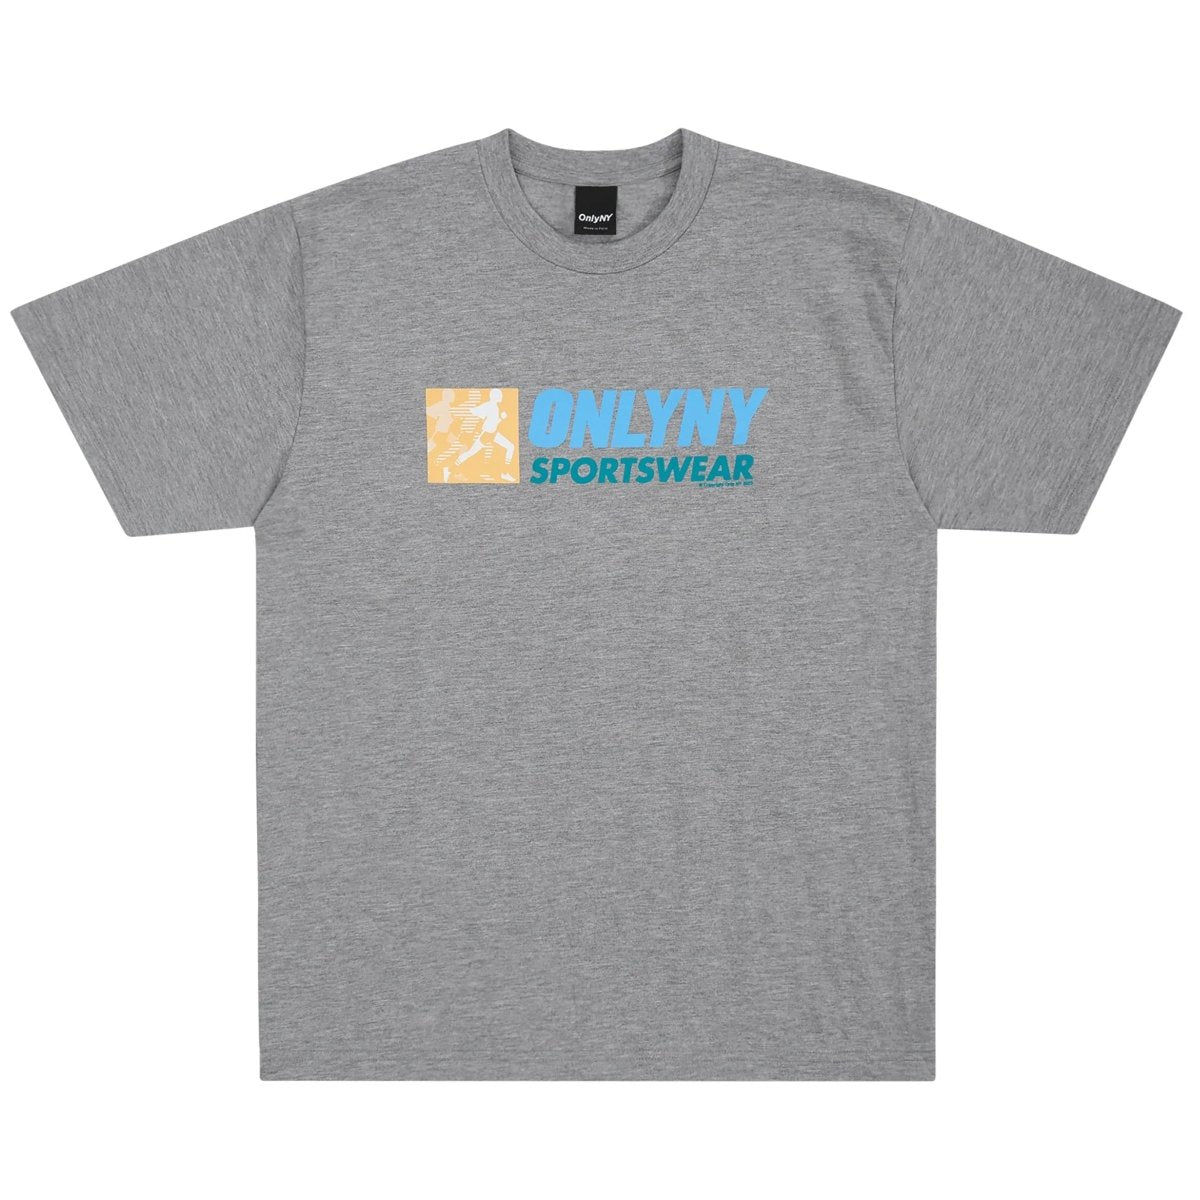 Only NY Medley Tee Shirt Grey - 10031925 - West NYC